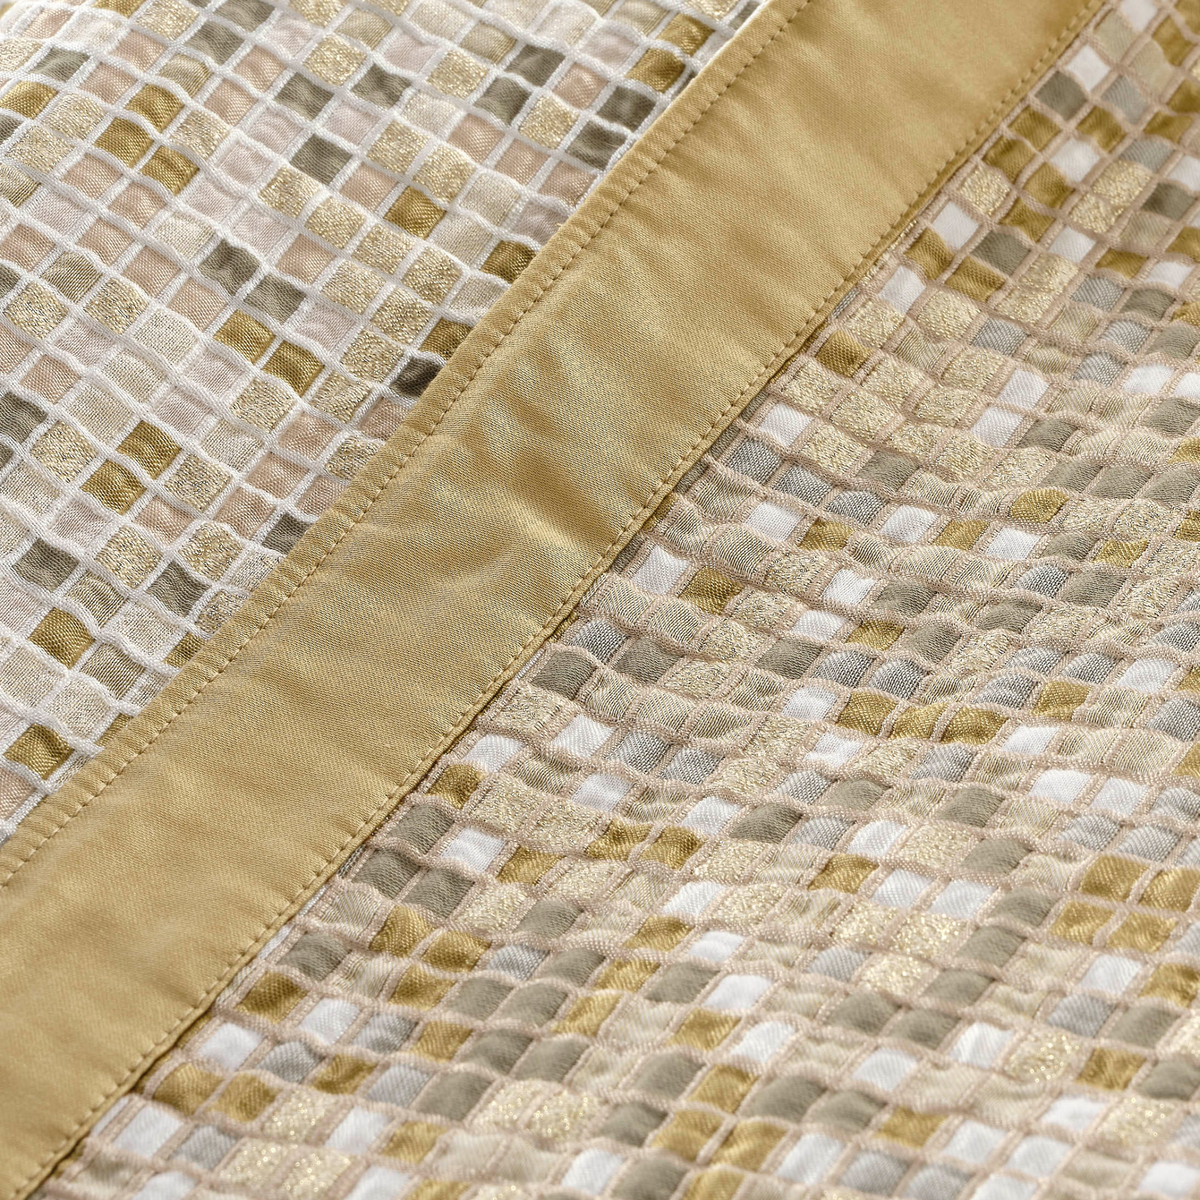 Fabric Detail of Celso de Lemos Mosaic Collection